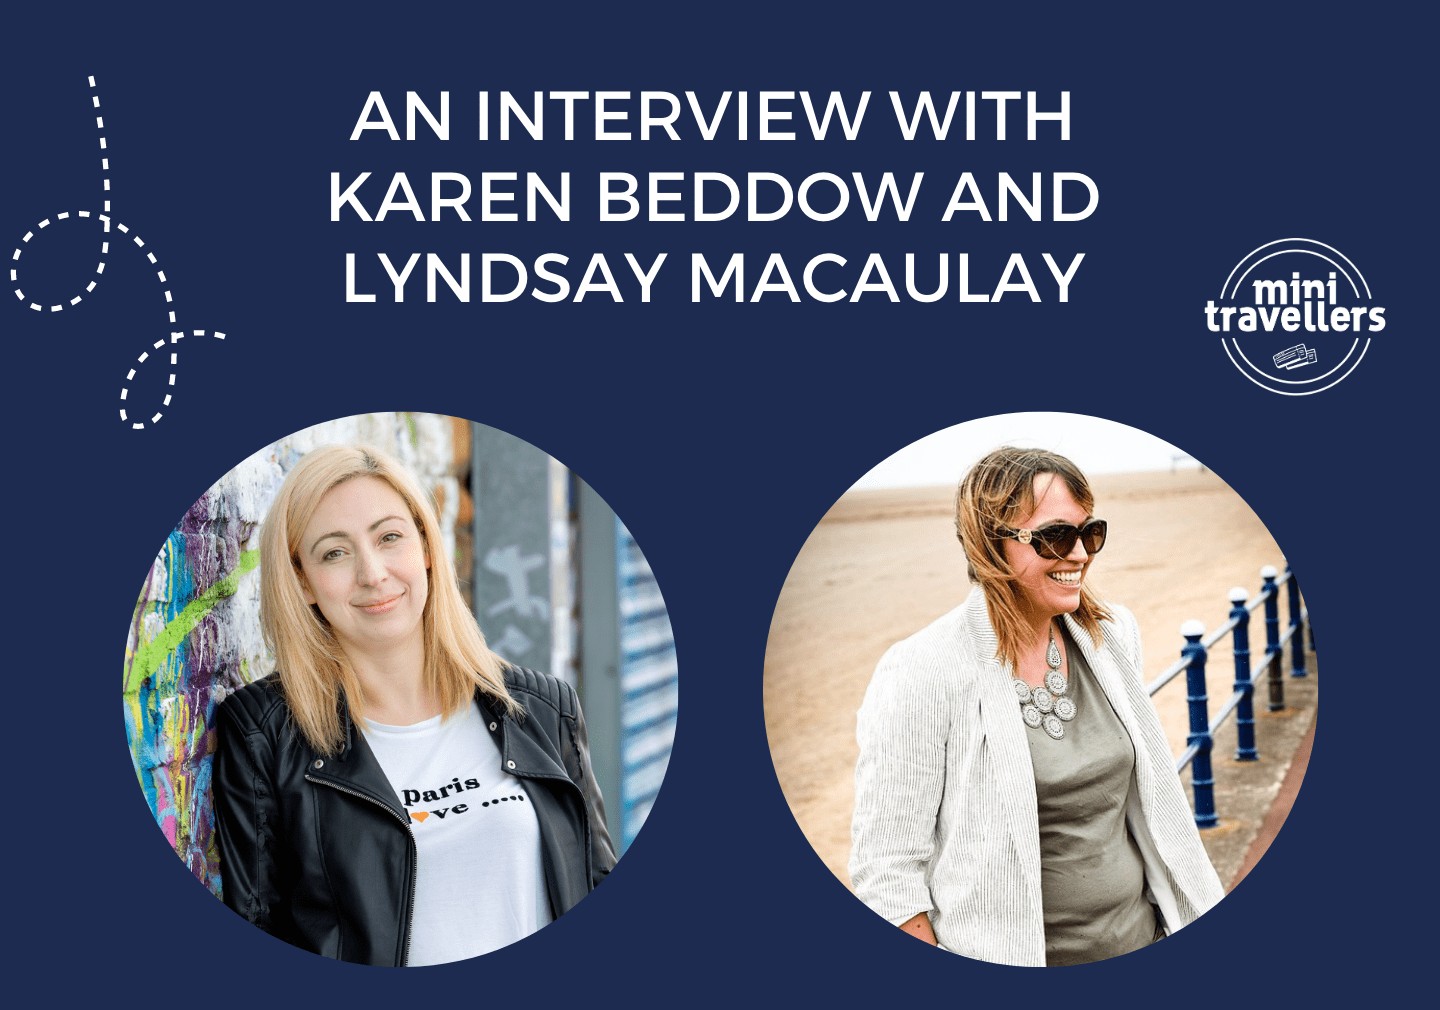 An interview with Karen Beddow and Lyndsay Macaulay